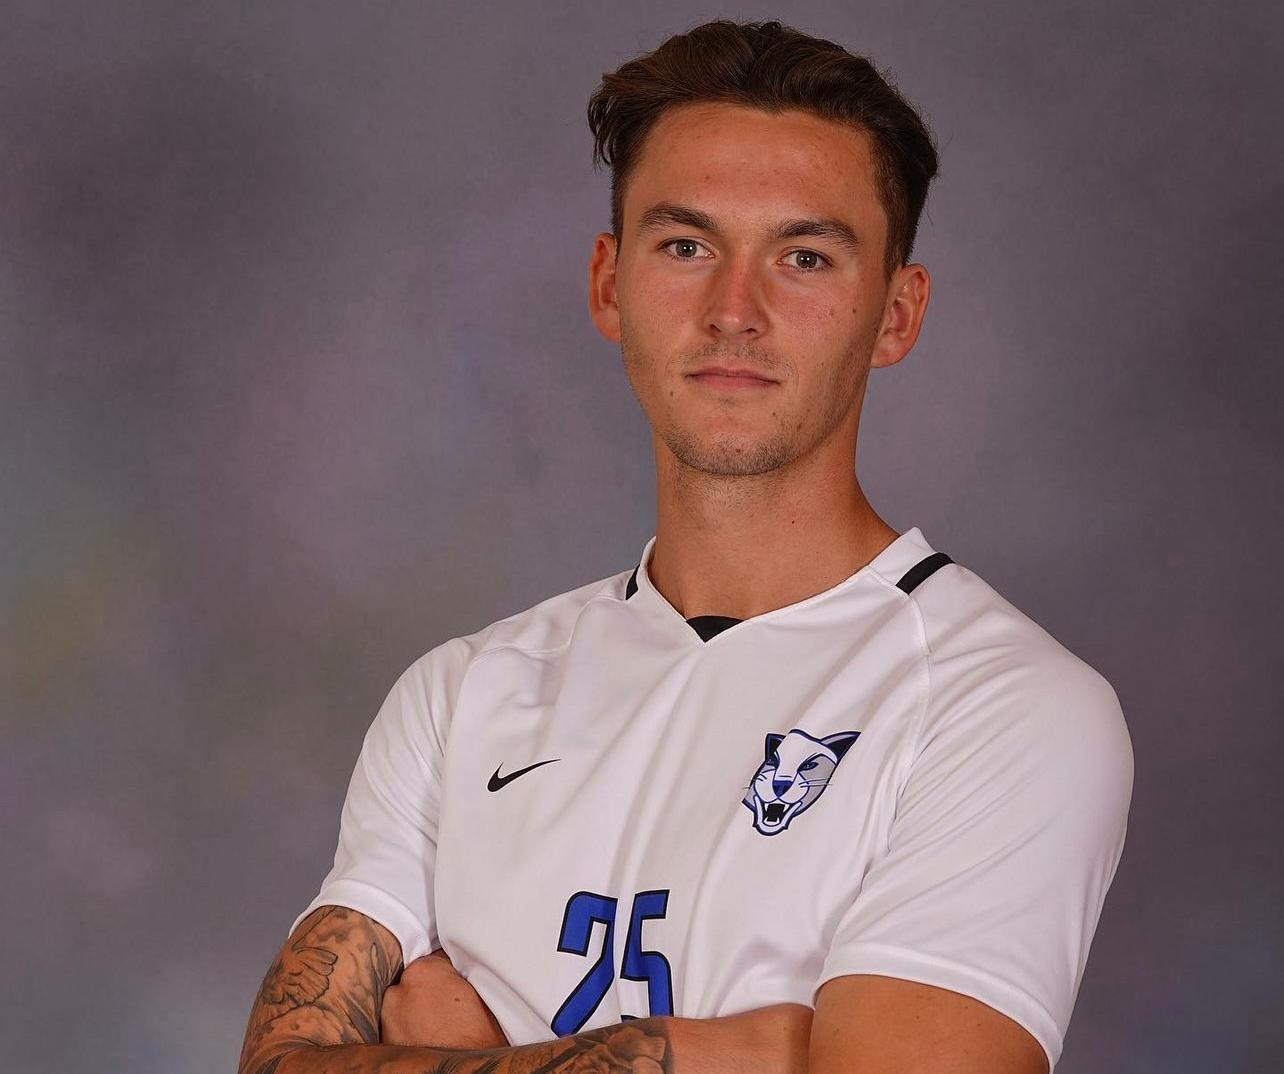 Former Football Academy player and Sport student, Alfie Hyett, won a scholarship to the States and has played for US uni soccer teams in South Carolina, North Carolina and now New York